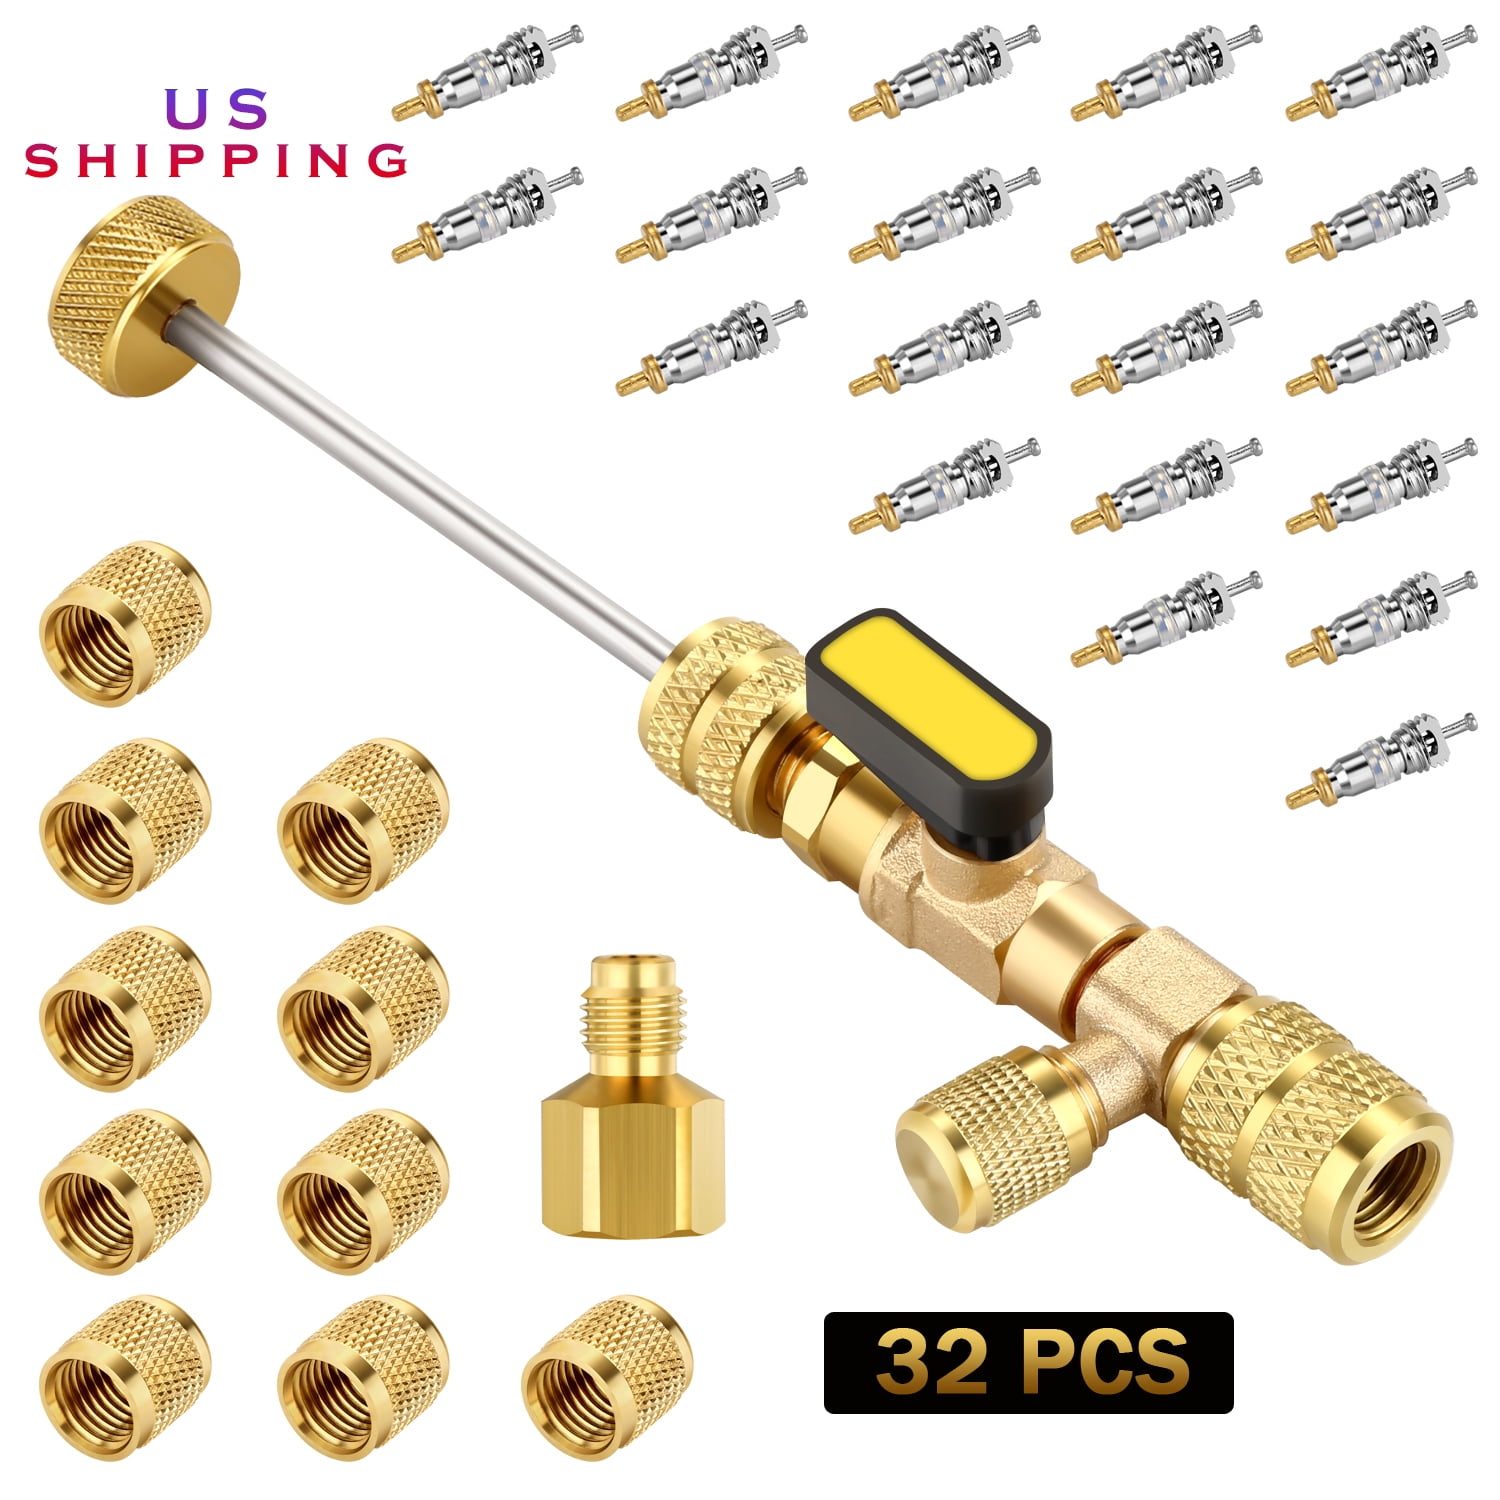 10 Replacement Cores for AC & Refrigeration Acces Valve Core Remover Installer 